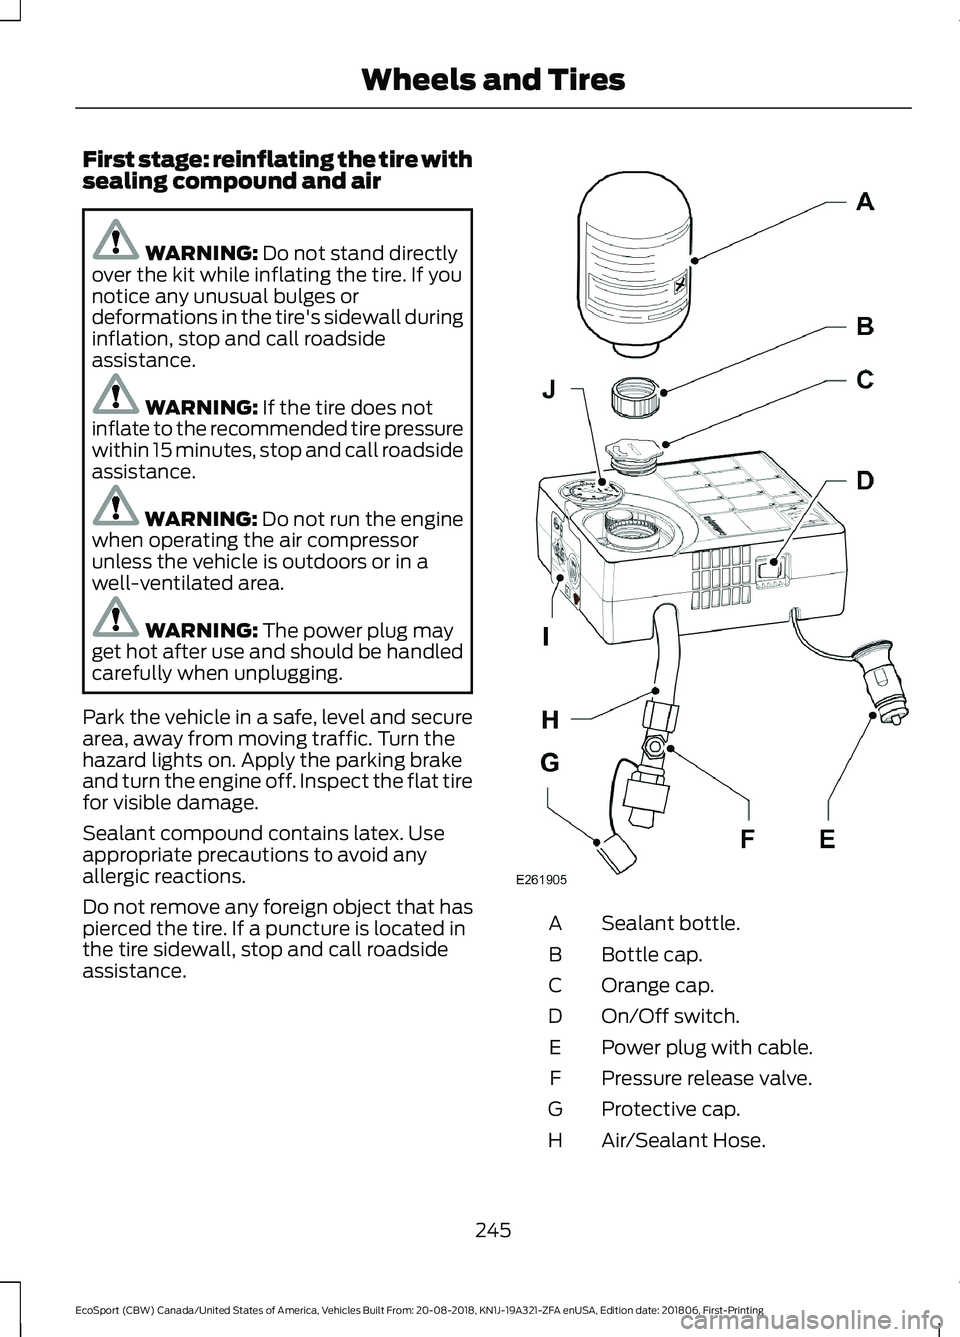 FORD ECOSPORT 2019  Owners Manual First stage: reinflating the tire withsealing compound and air
WARNING: Do not stand directlyover the kit while inflating the tire. If younotice any unusual bulges ordeformations in the tire's sid